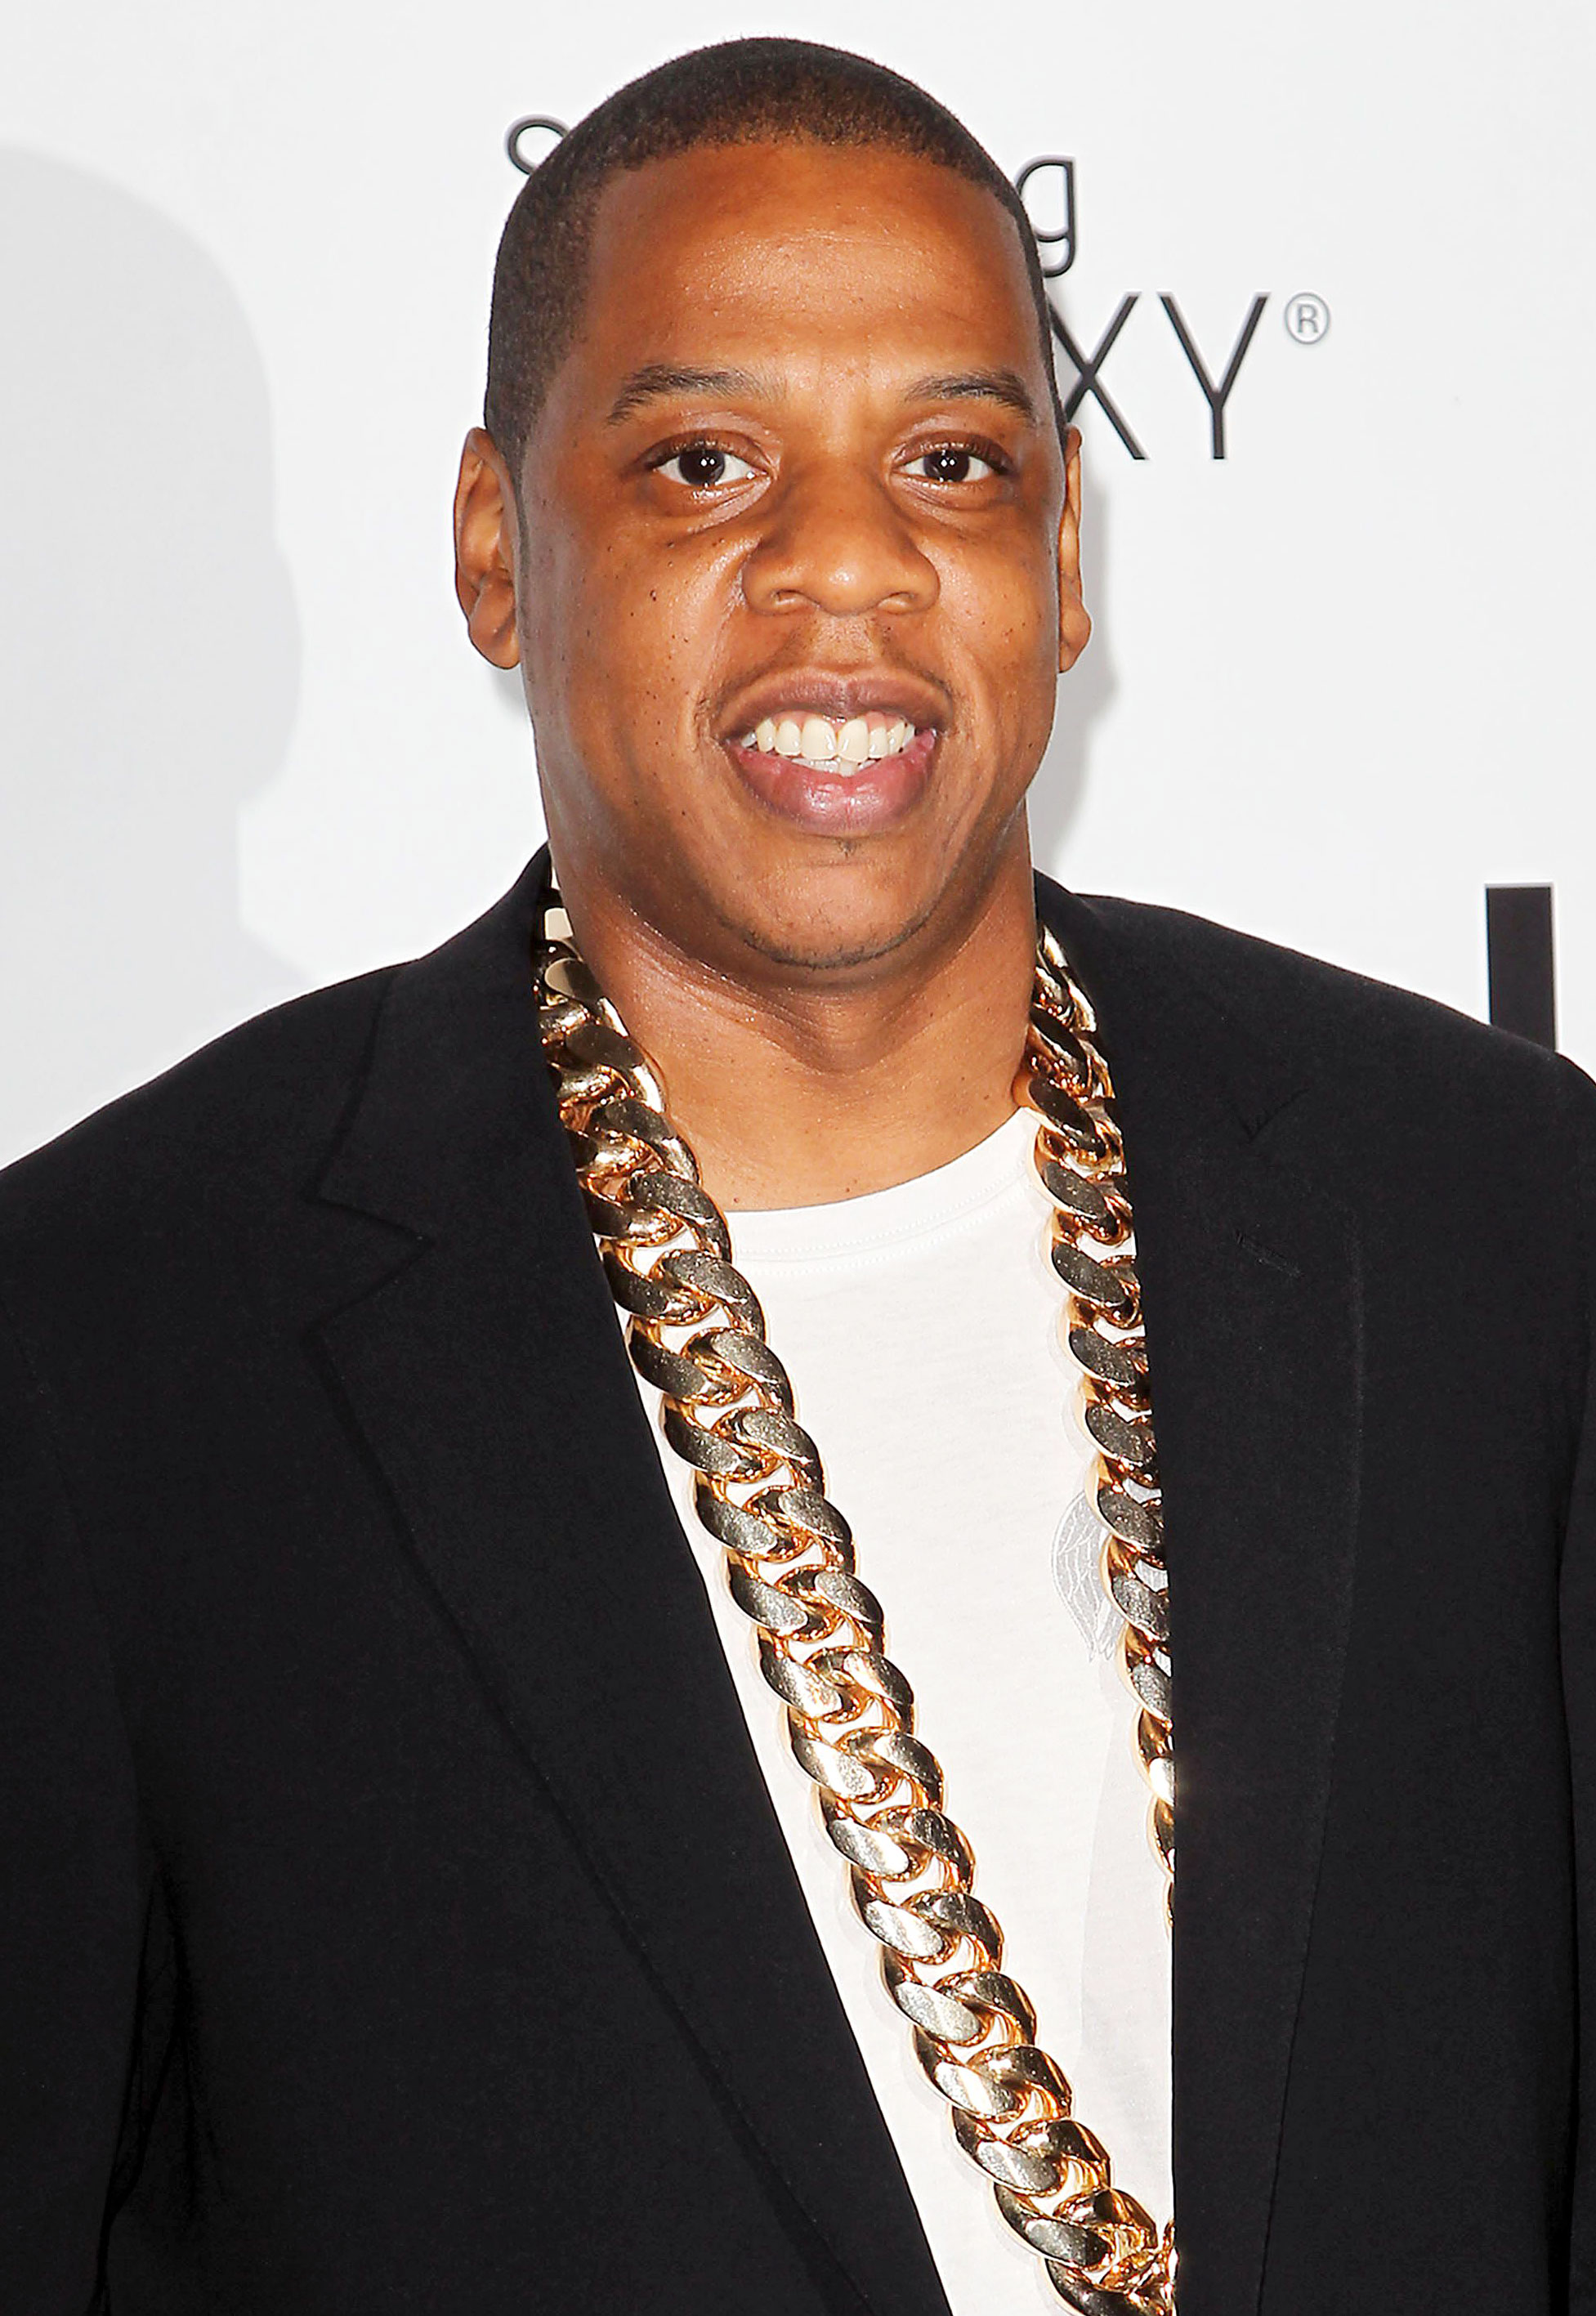 Man in 74-year-old photo resembles rapper Jay-Z